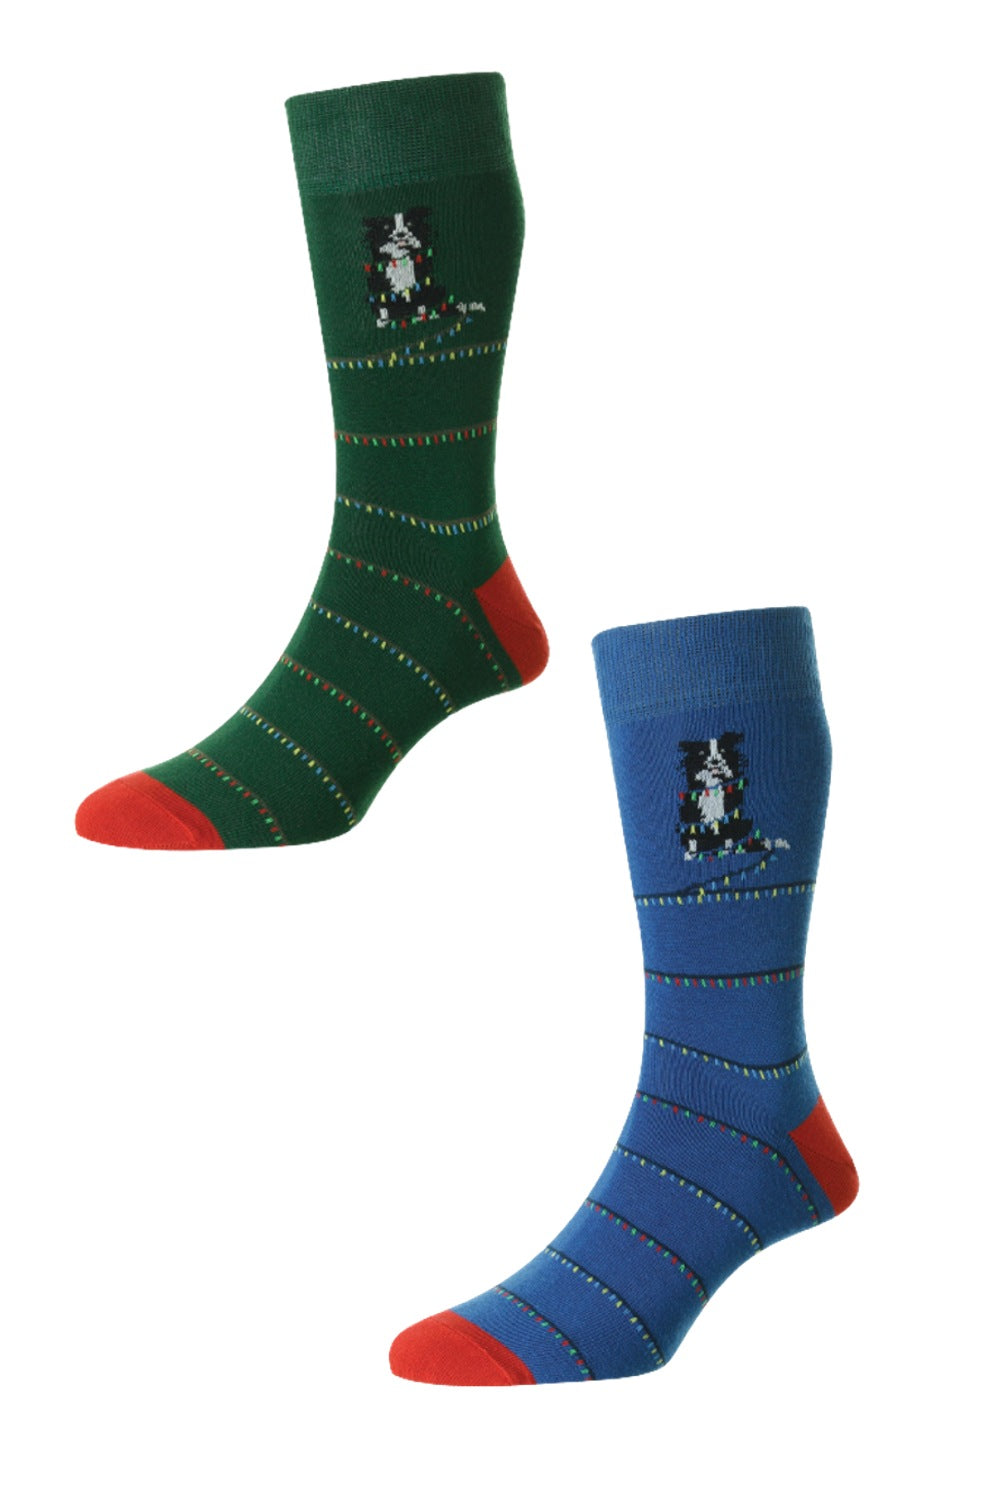 HJ Hall Dog With Christmas Lights Cotton Rich Socks in Forest Green and Royal Blue